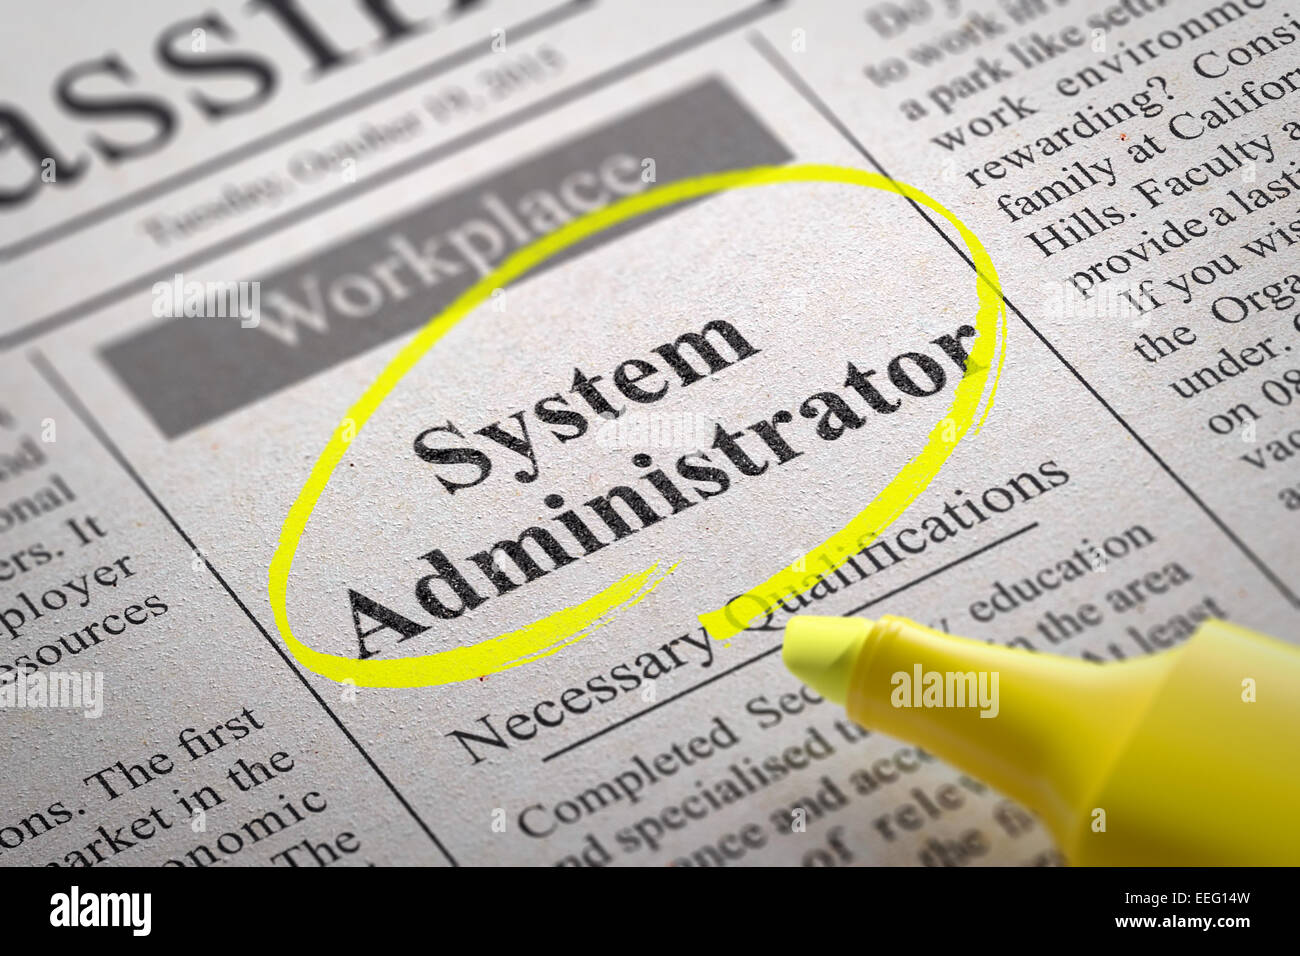 System Administrator Jobs in Newspaper. Stock Photo